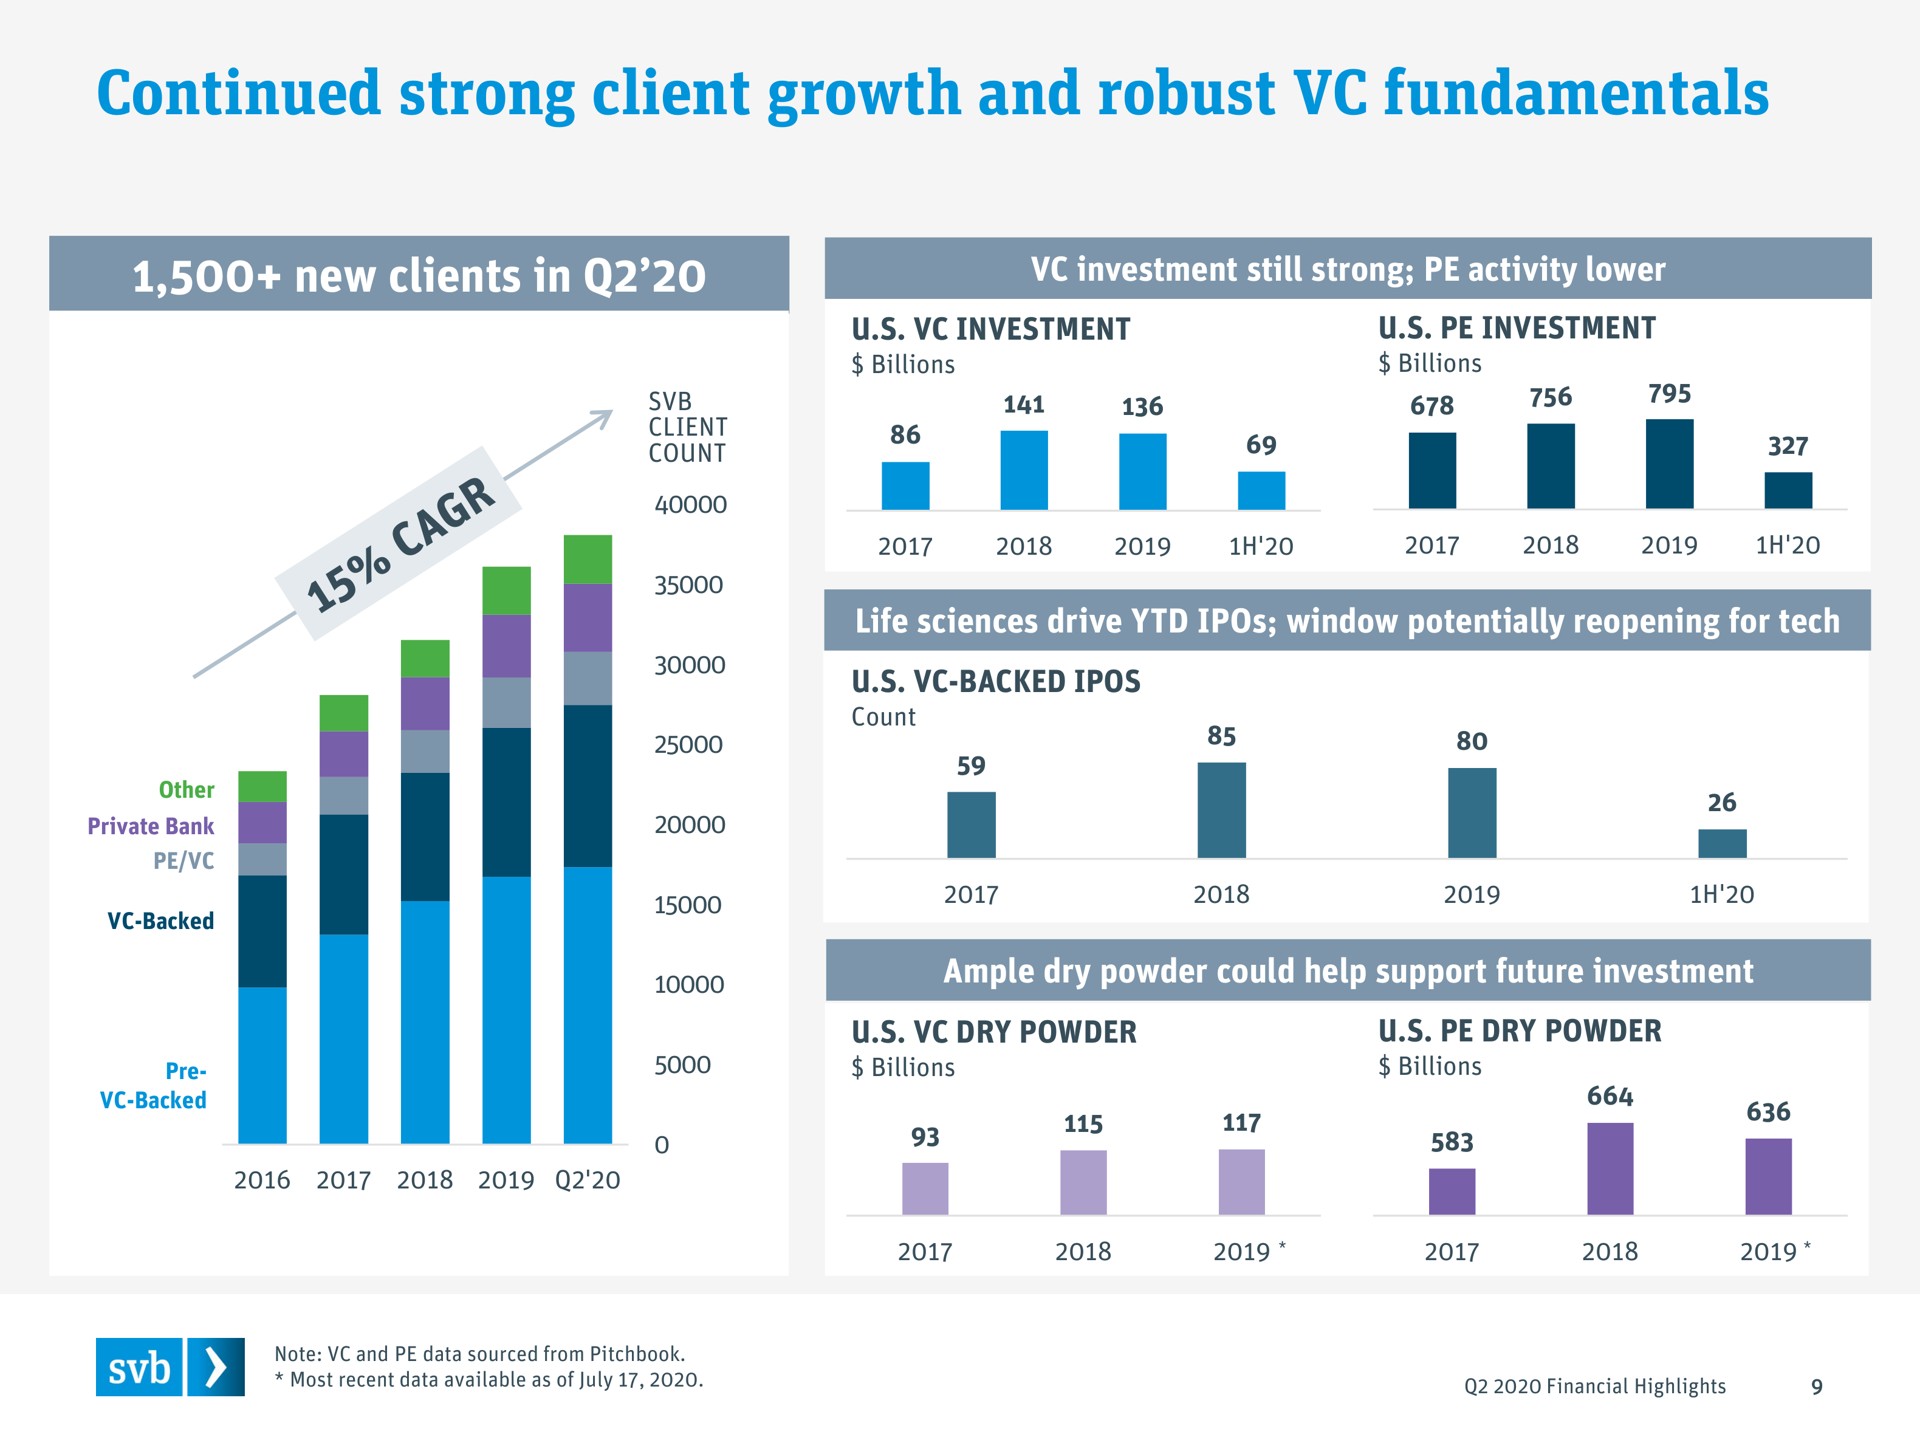 continued strong client growth and robust fundamentals | Silicon Valley Bank